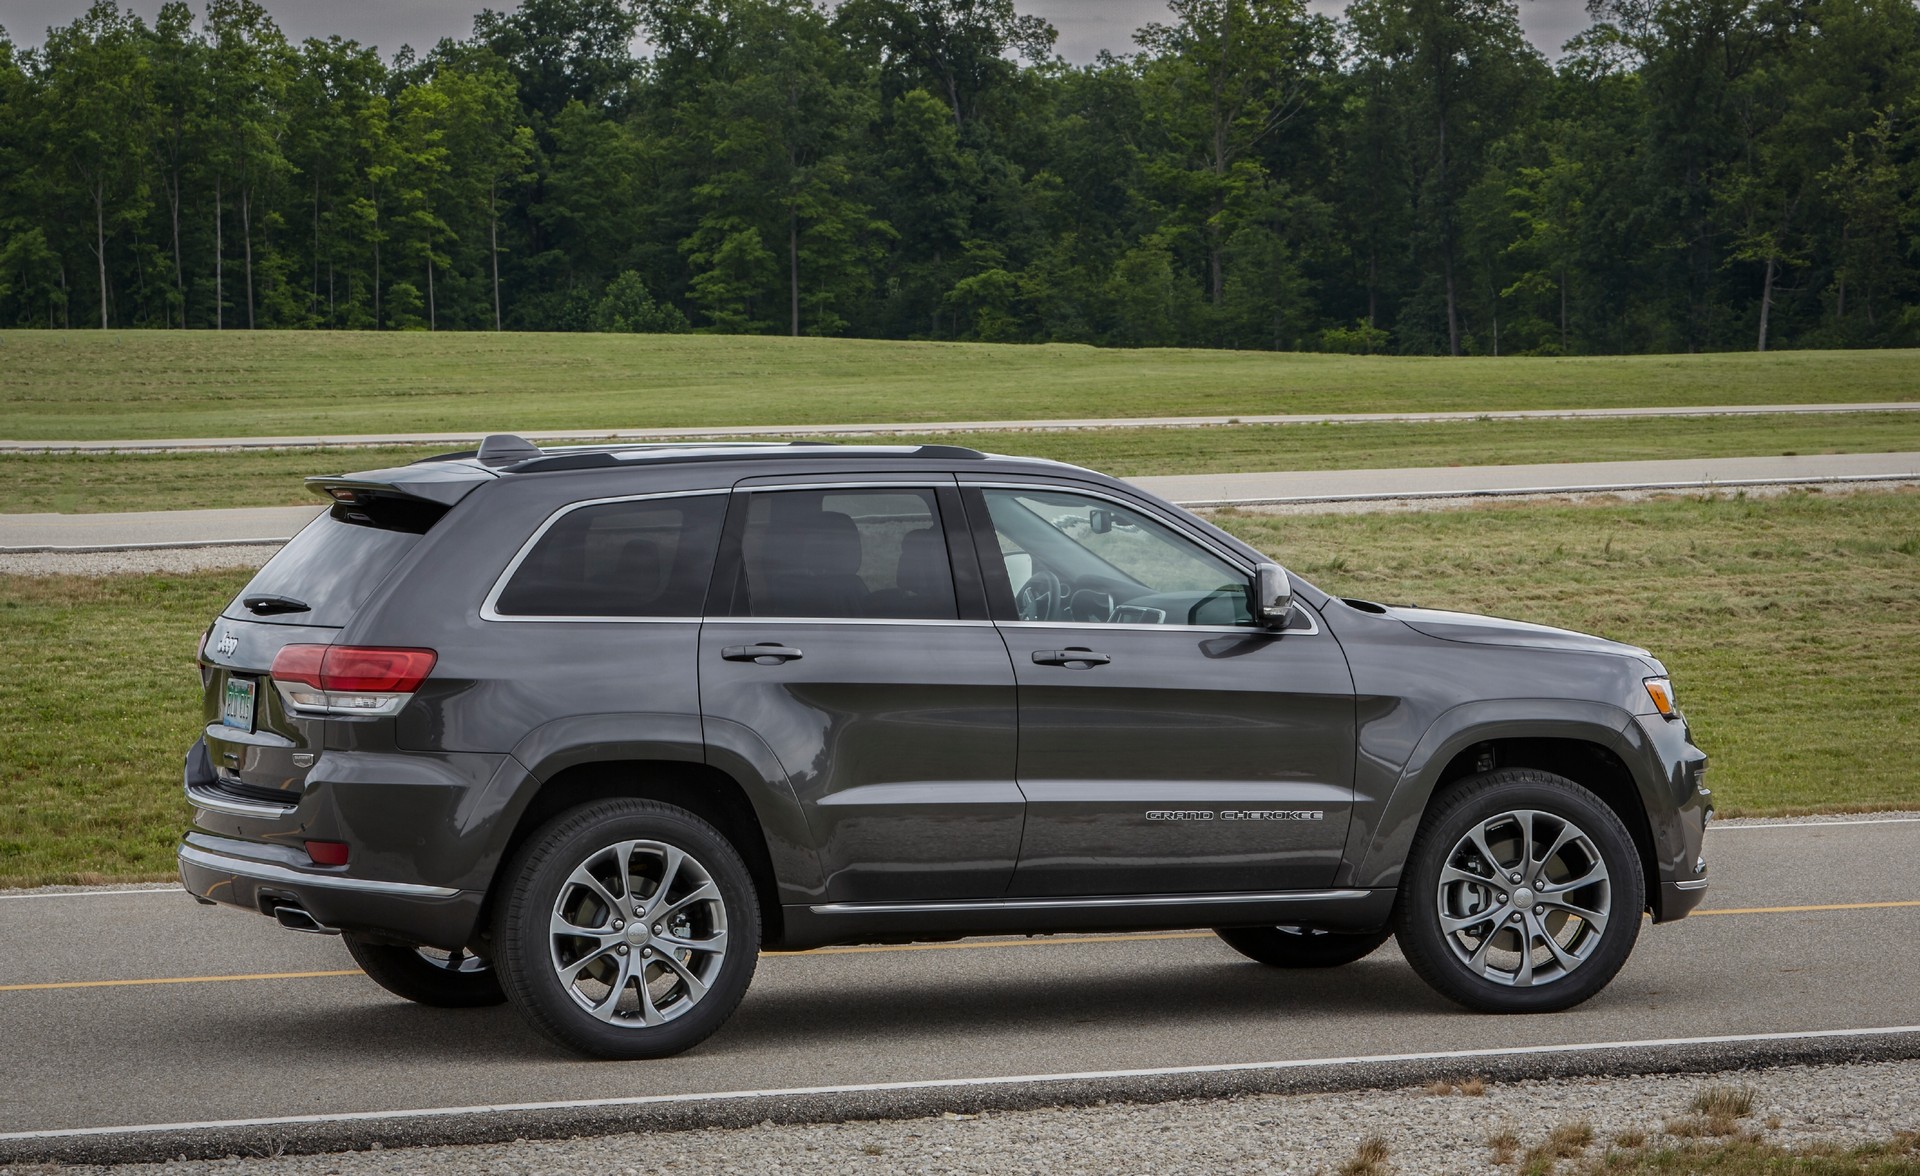 Trail Rated, Mexico’s Jeep Grand Cherokee Can Withstand Rounds